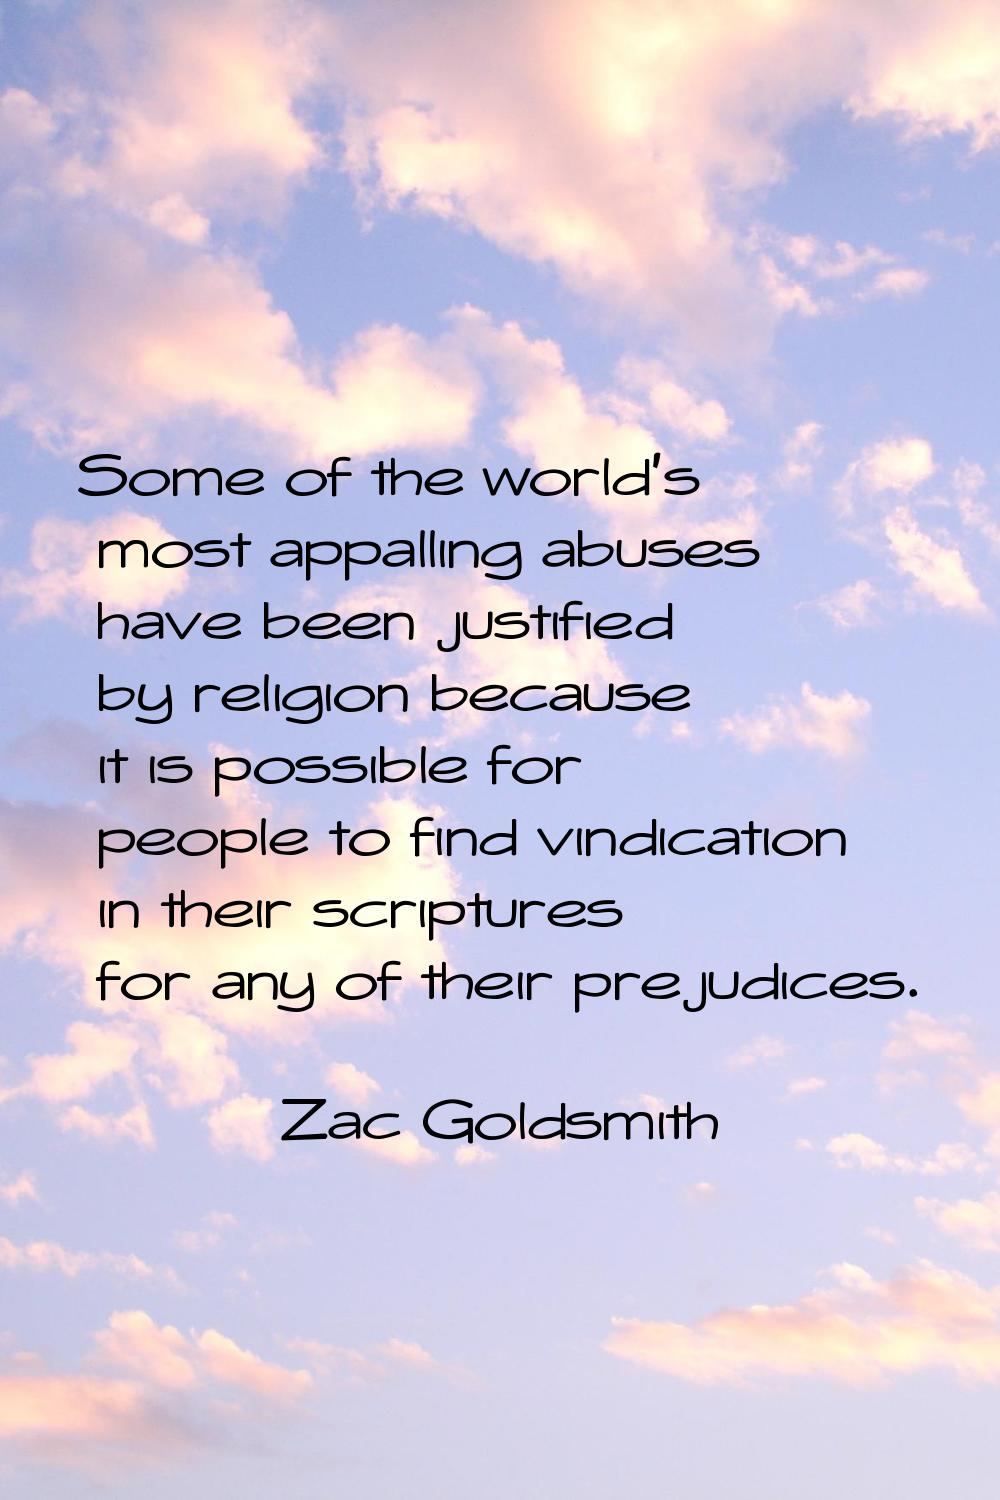 Some of the world's most appalling abuses have been justified by religion because it is possible fo